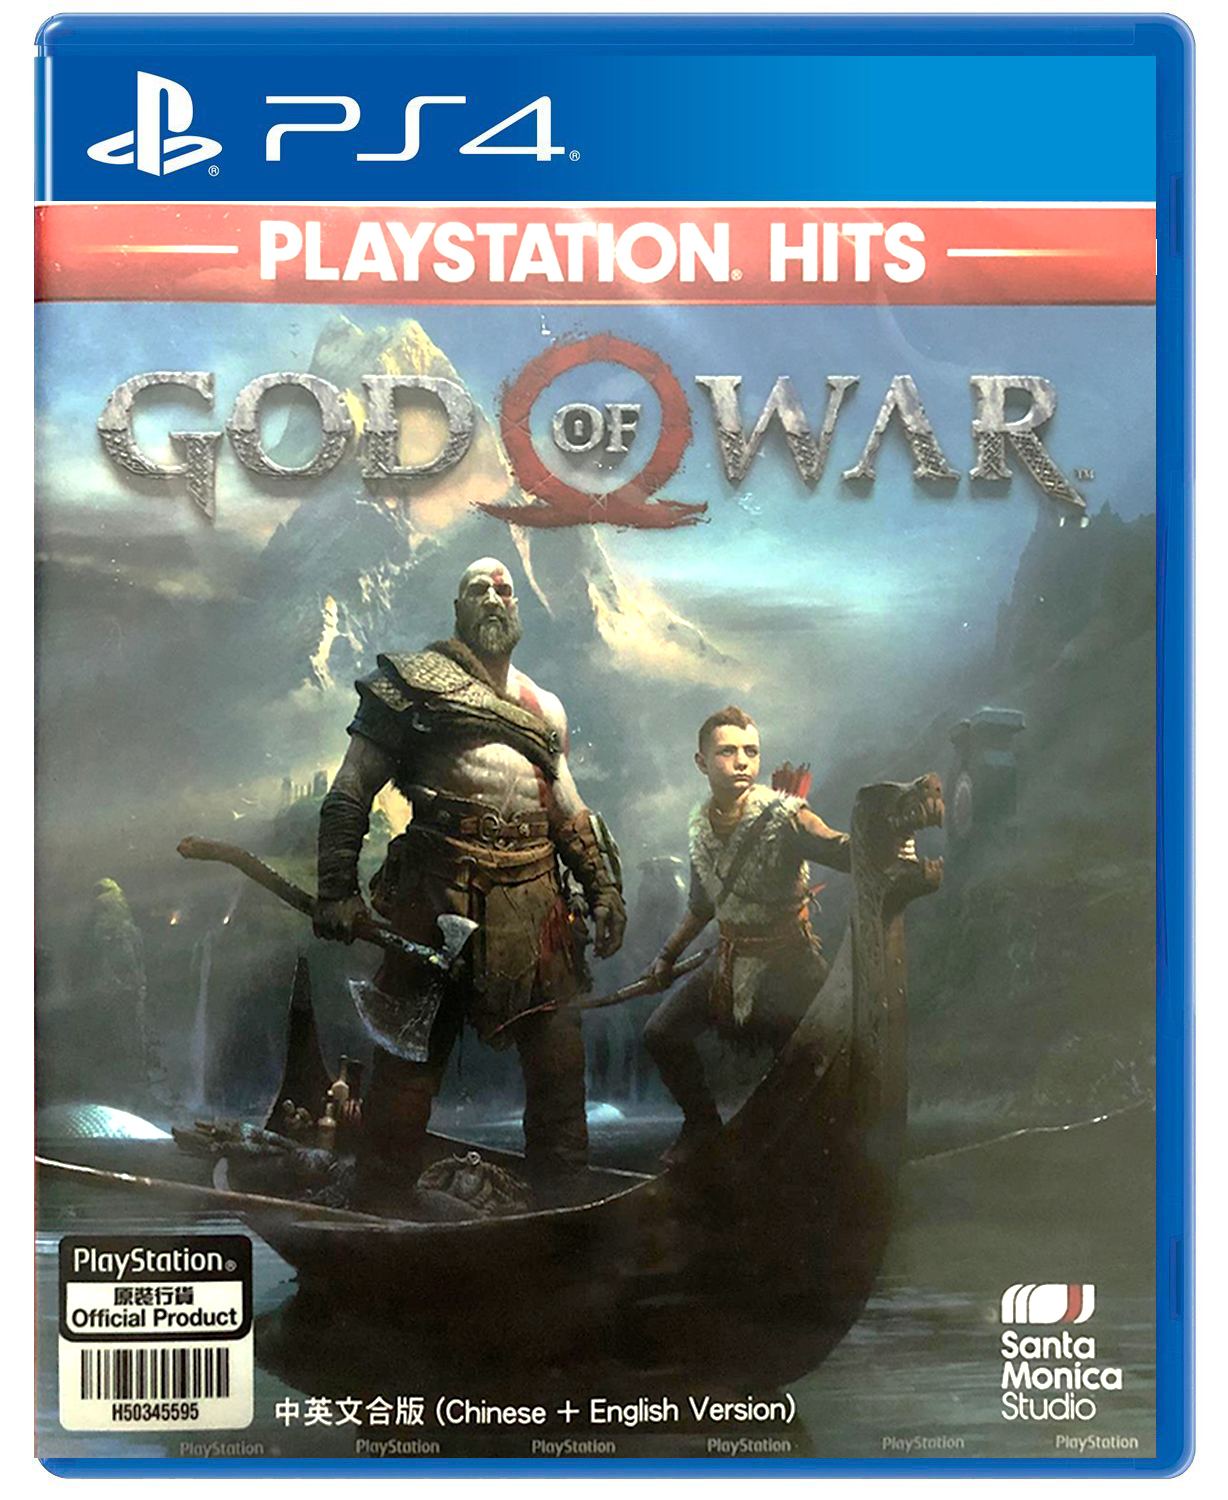 God of War (PlayStation Hits) (Multi-Language) for PlayStation 4 - Bitcoin  & Lightning accepted